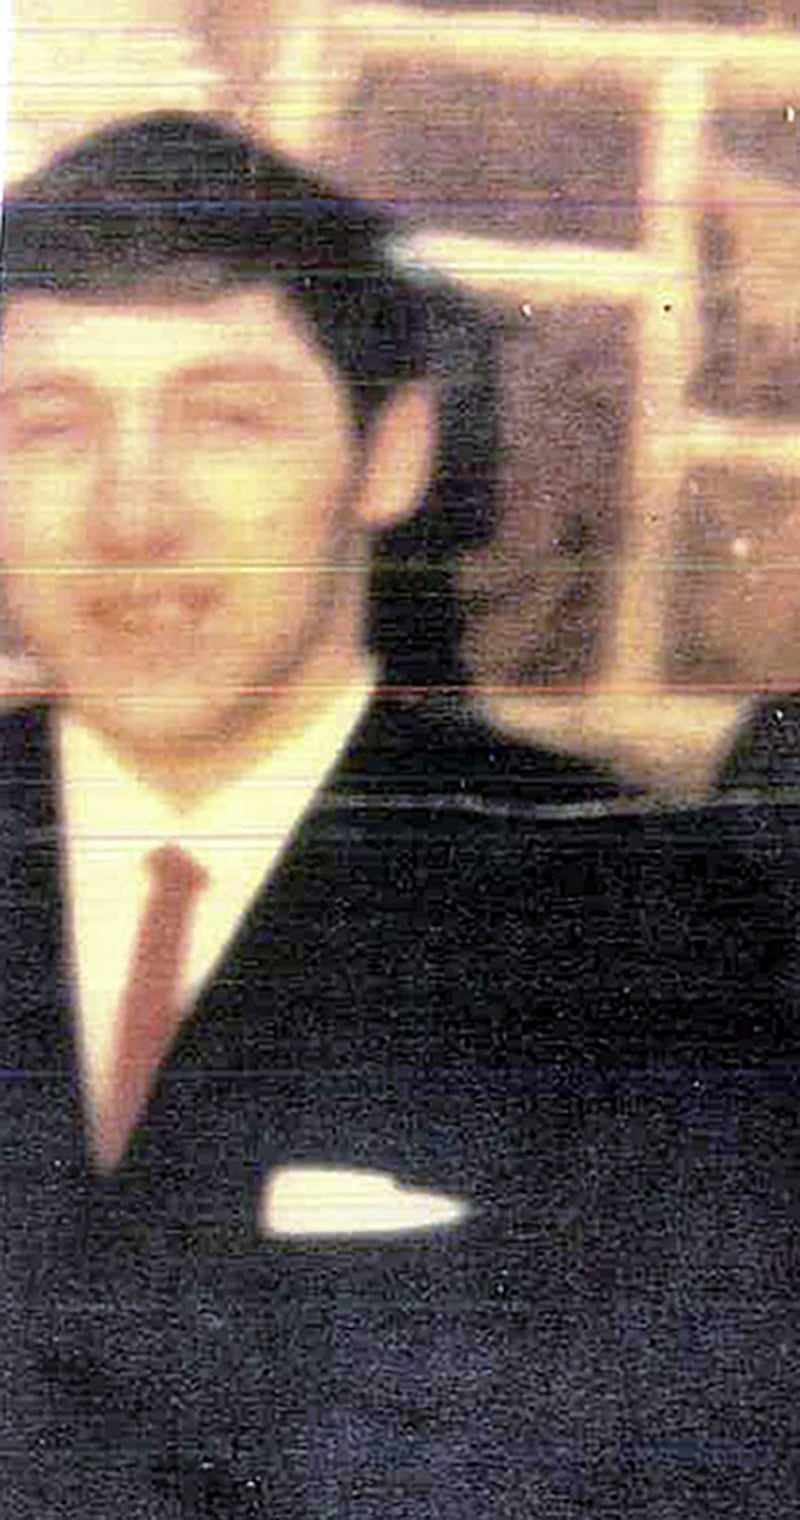 Joseph Parker was shot dead at a dance hall in Ardoyne in north Belfast in 1971 